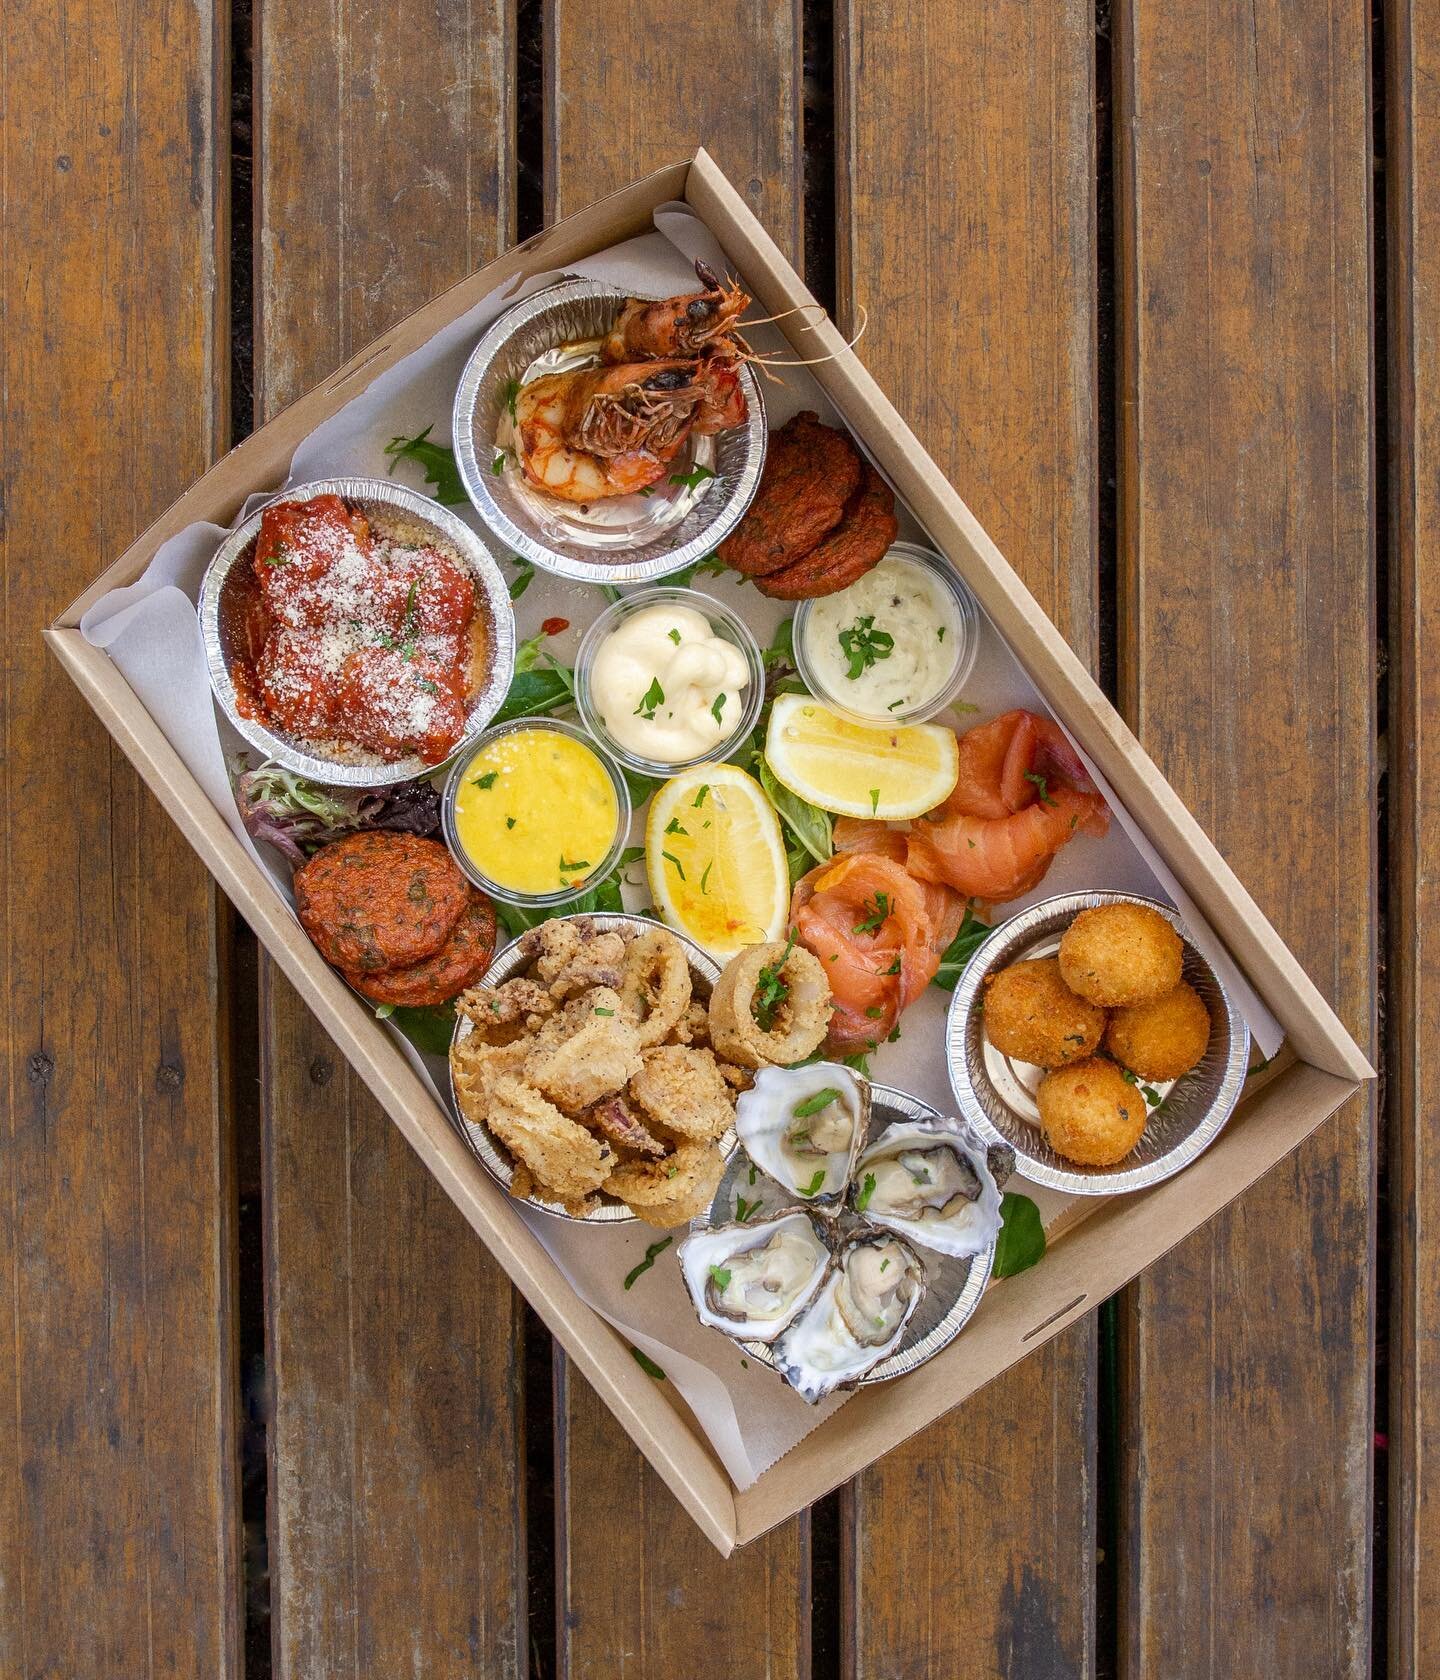 SPUNTINO BOXES: Italian for &lsquo;light meals&rsquo;! Each designed delectably around your tastebuds and the ease of taking away. Now available via the link in our bio, with a complimentary bottle of house wine xxx